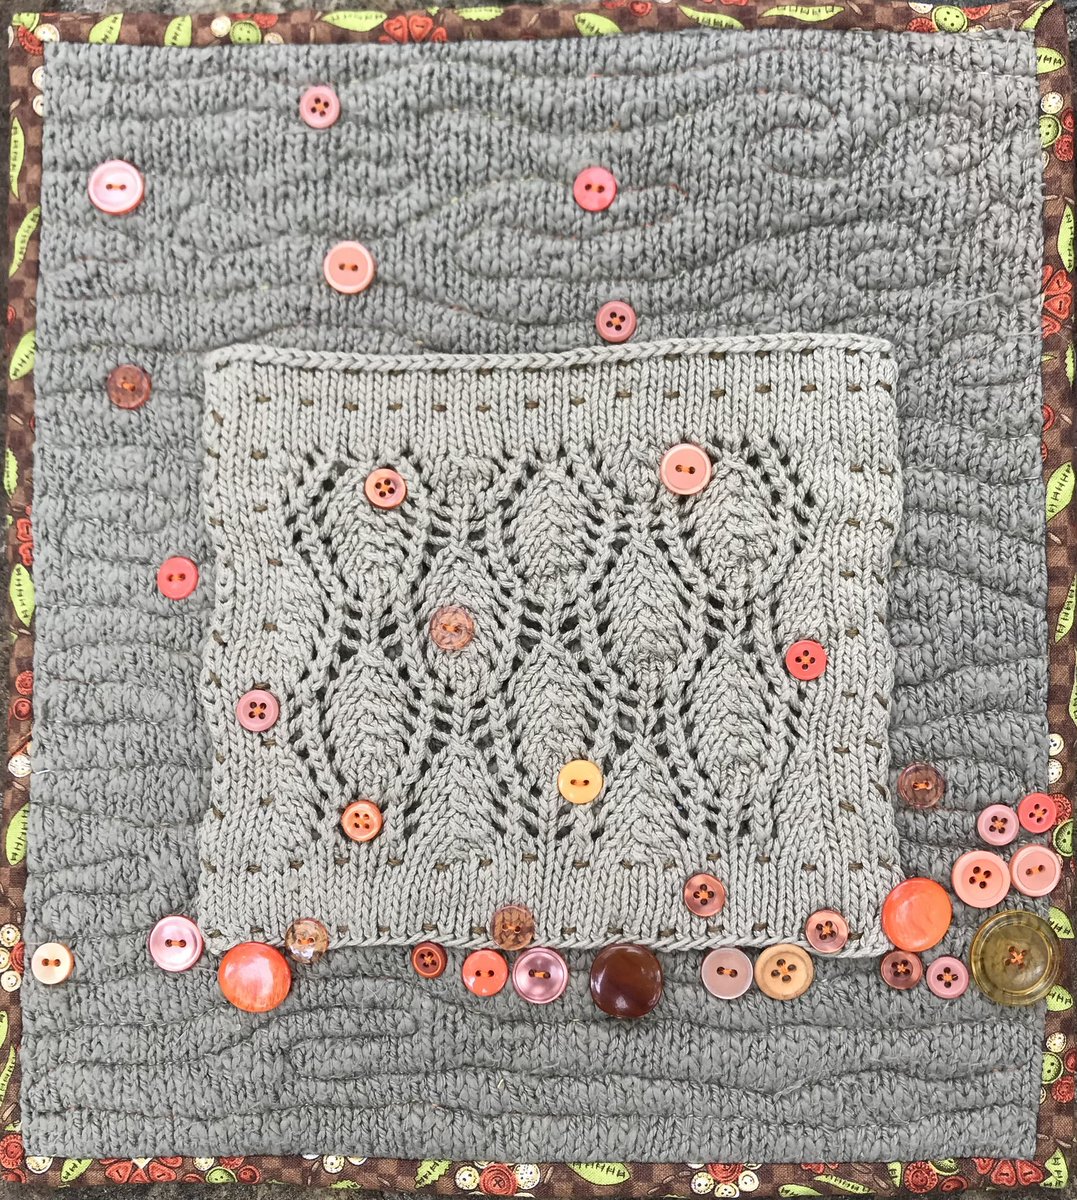 A lady wanted a wedding gift for her granddaughter, who liked autumn colors. We looked through my stack of little quilts and found Falling Leaves. It’s off to a new home.❤️
#ArtAdventCalendar #Buttons #FallingLeaves #MiniQuilt #SampleSeries